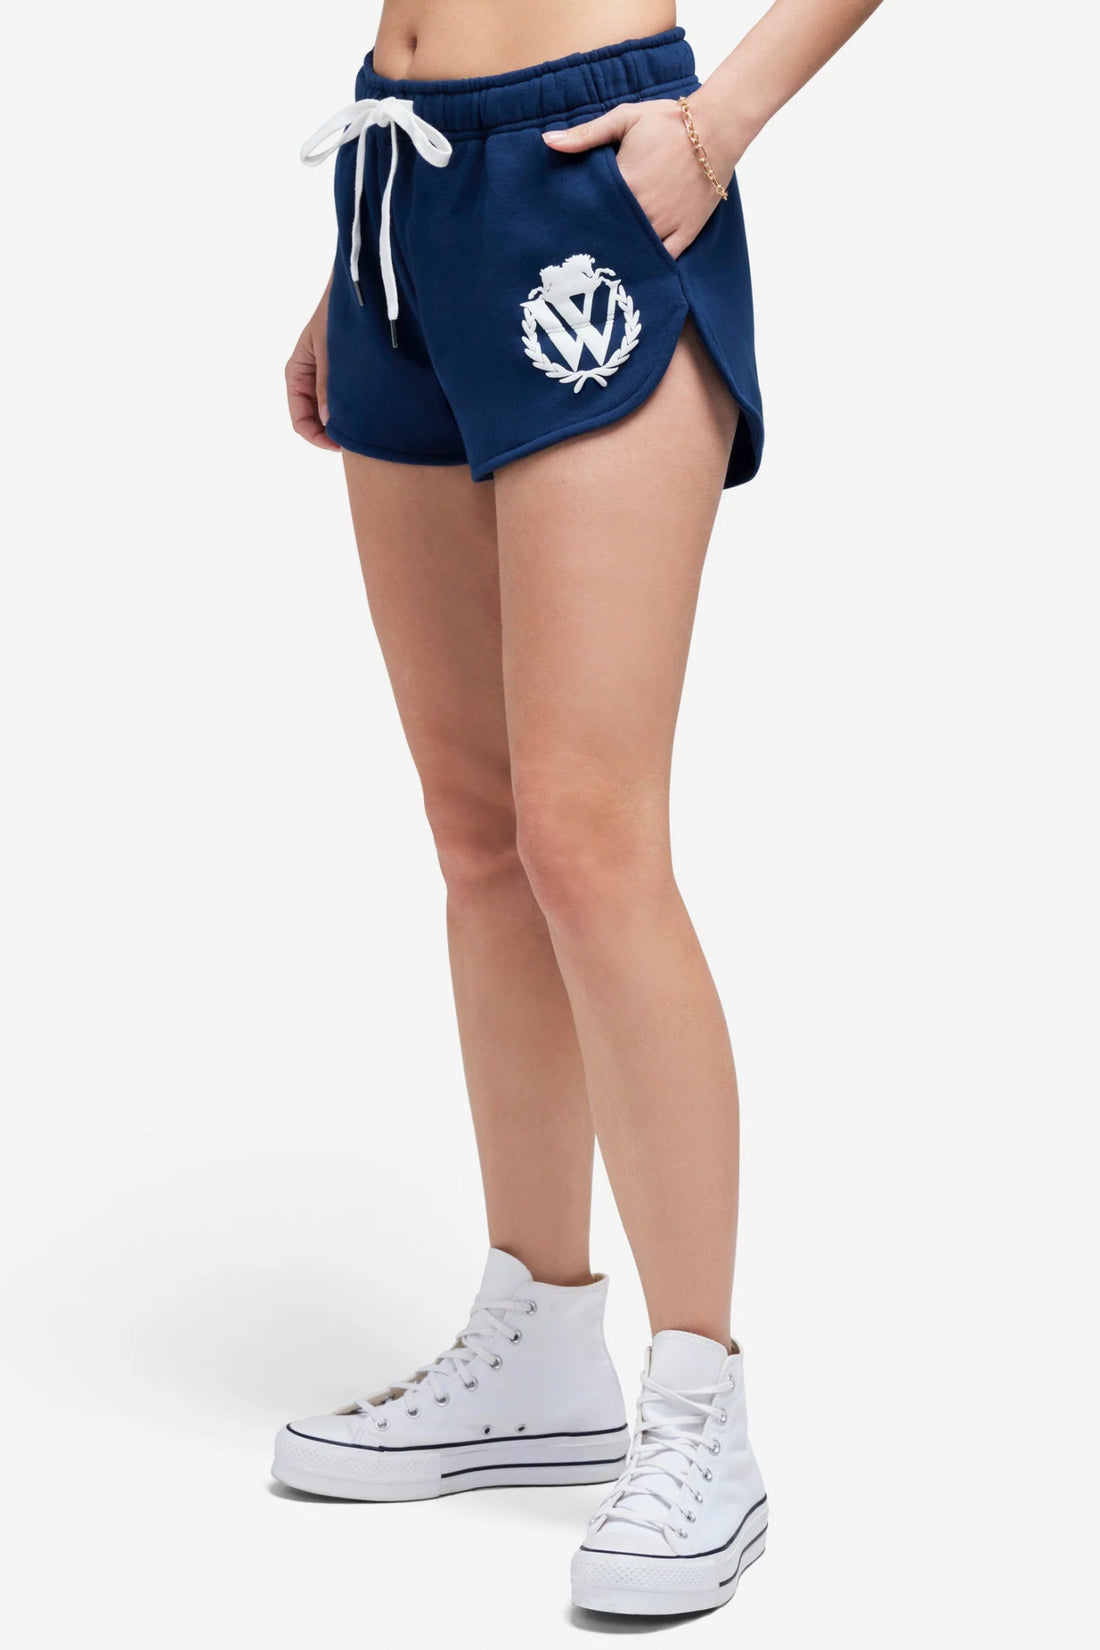 Shop Wildfox 90s Crest Jules Shorts - Premium Shorts from Wildfox Online now at Spoiled Brat 